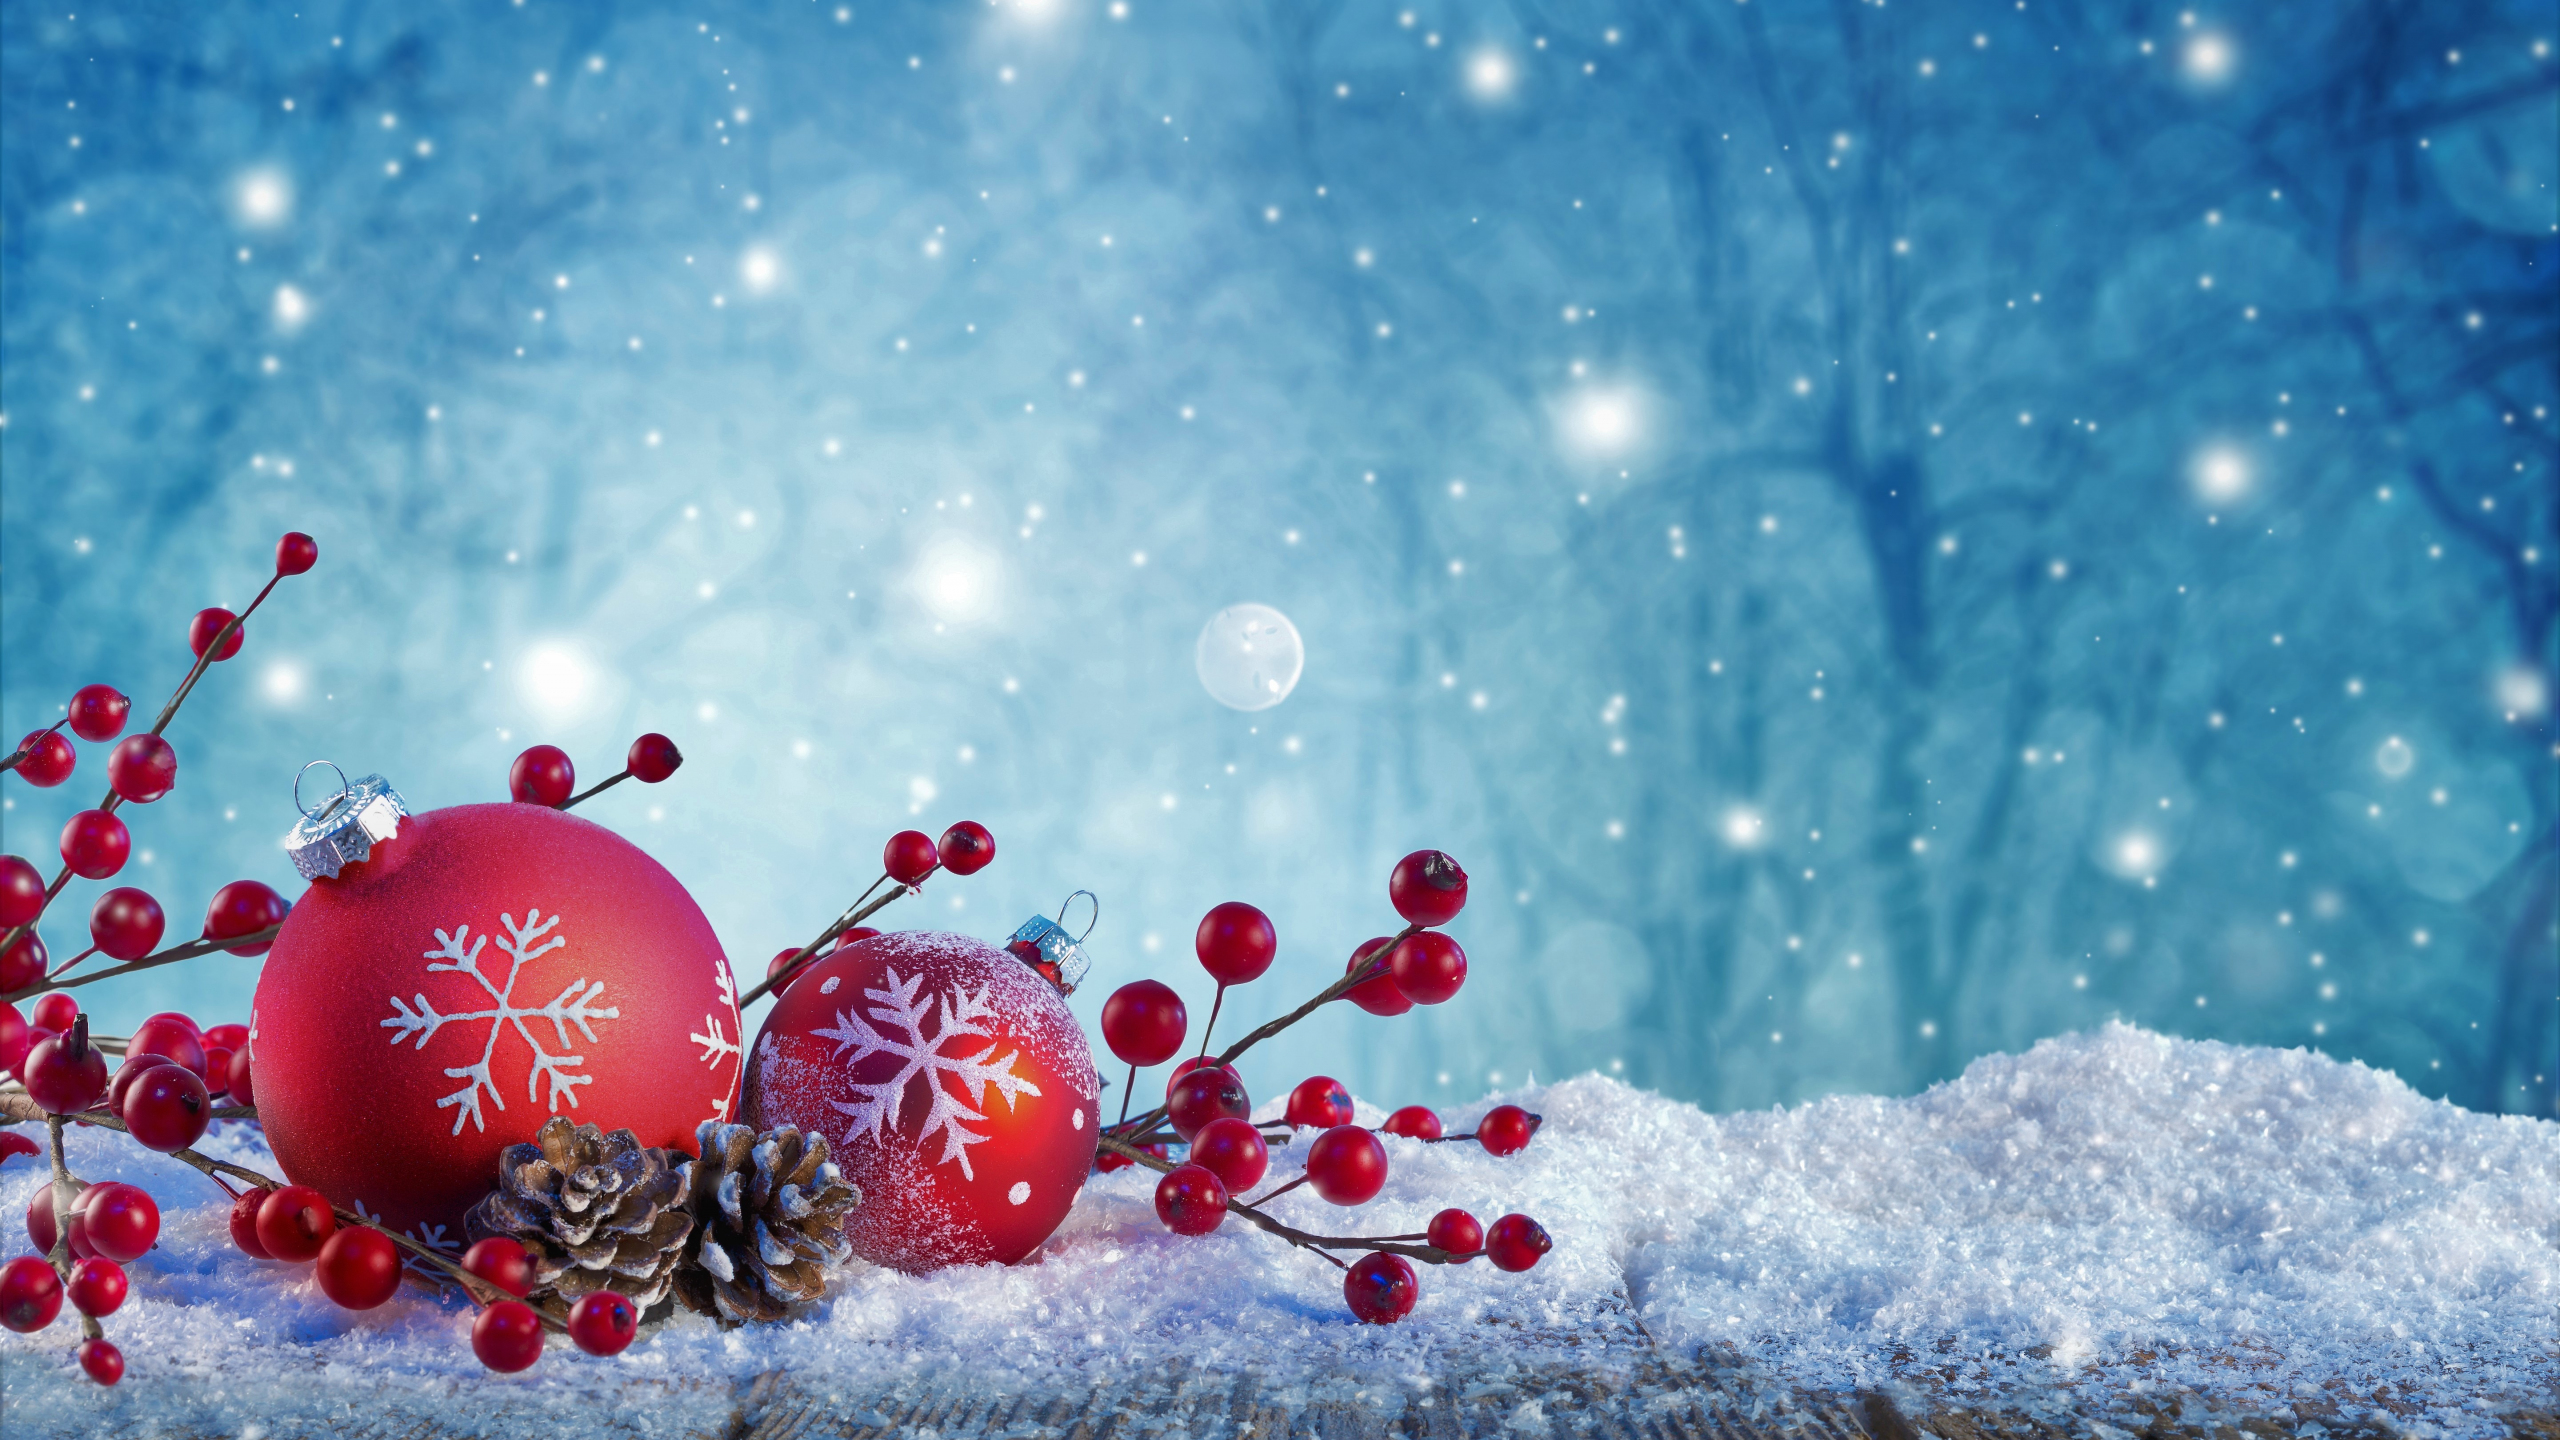 Christmas 2560x1440 HD Wallpapers - Wallpaper Cave